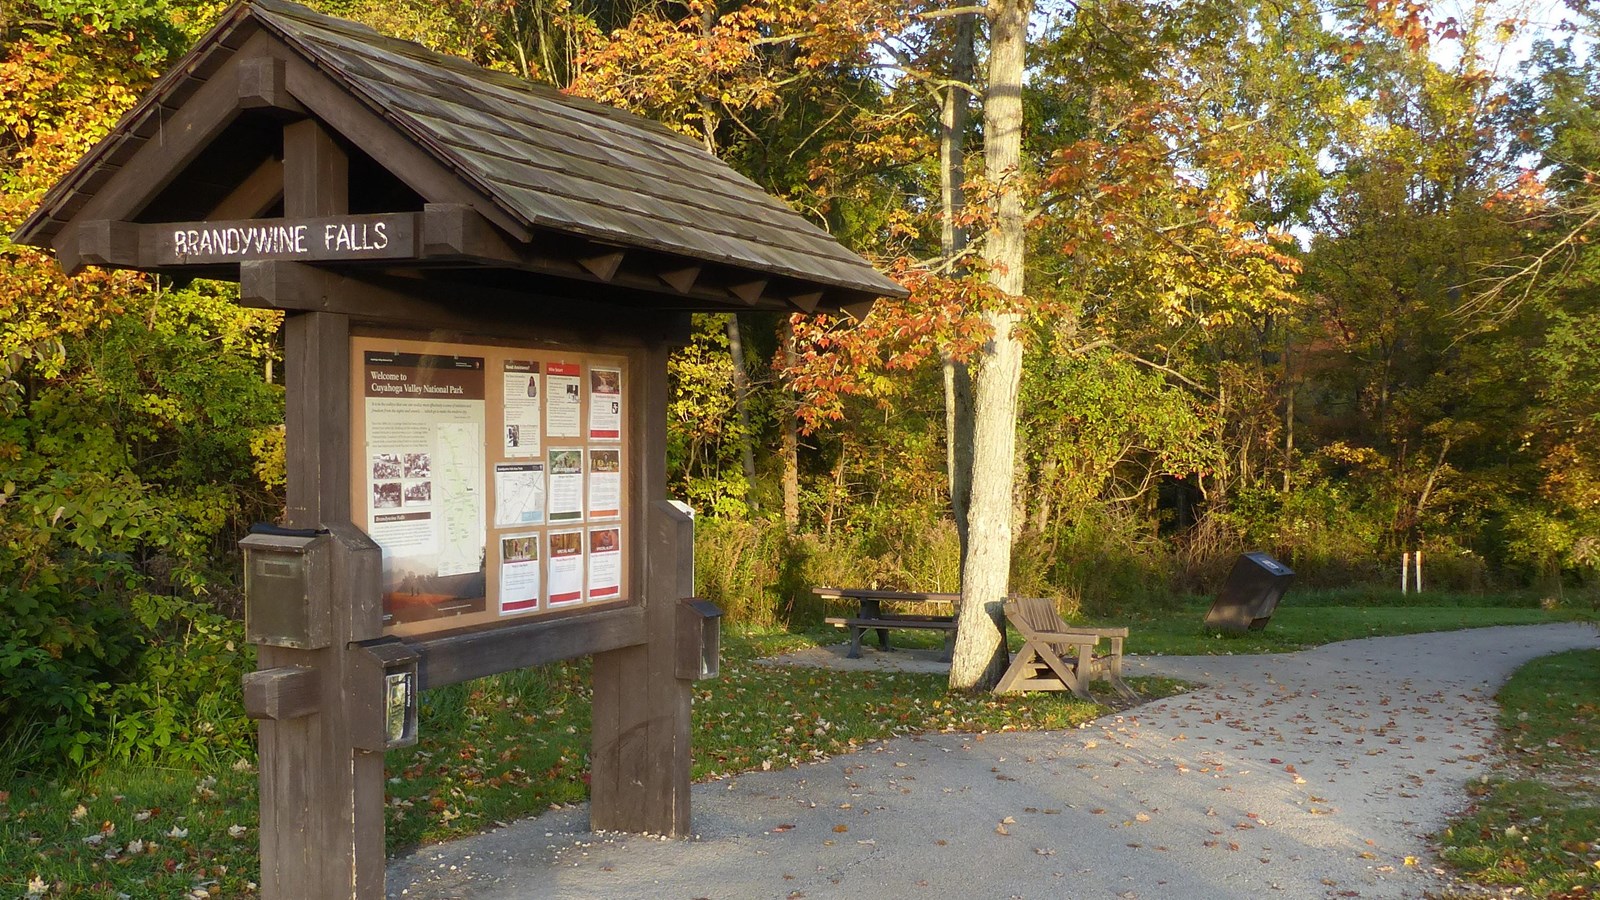 A roofed “Brandywine Falls” information kiosk stands along a paved path leading past picnic tables.